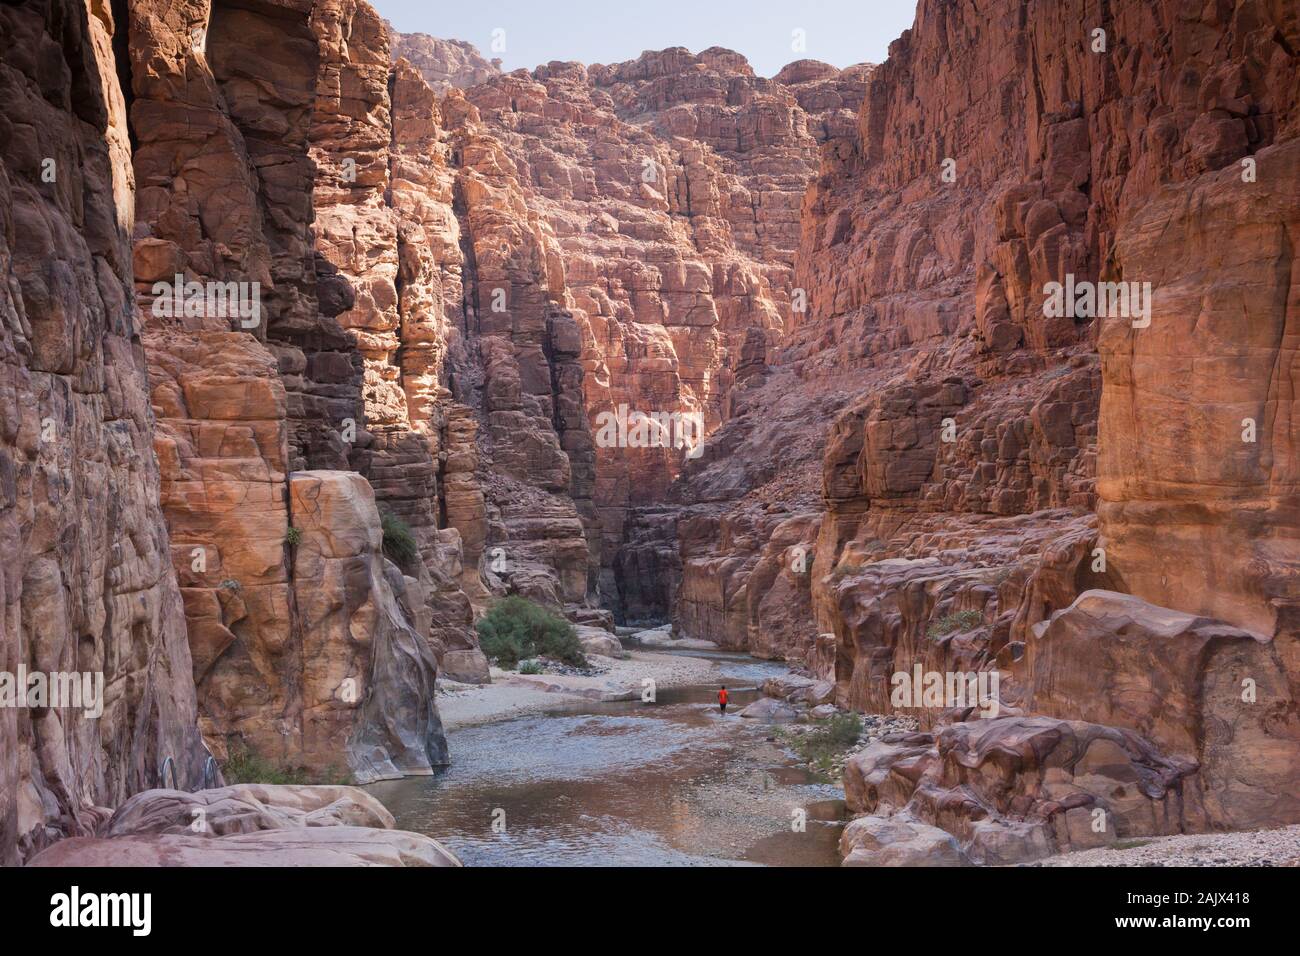 Wadi Mujib Nature Reserve High Resolution Stock Photography and Images -  Alamy